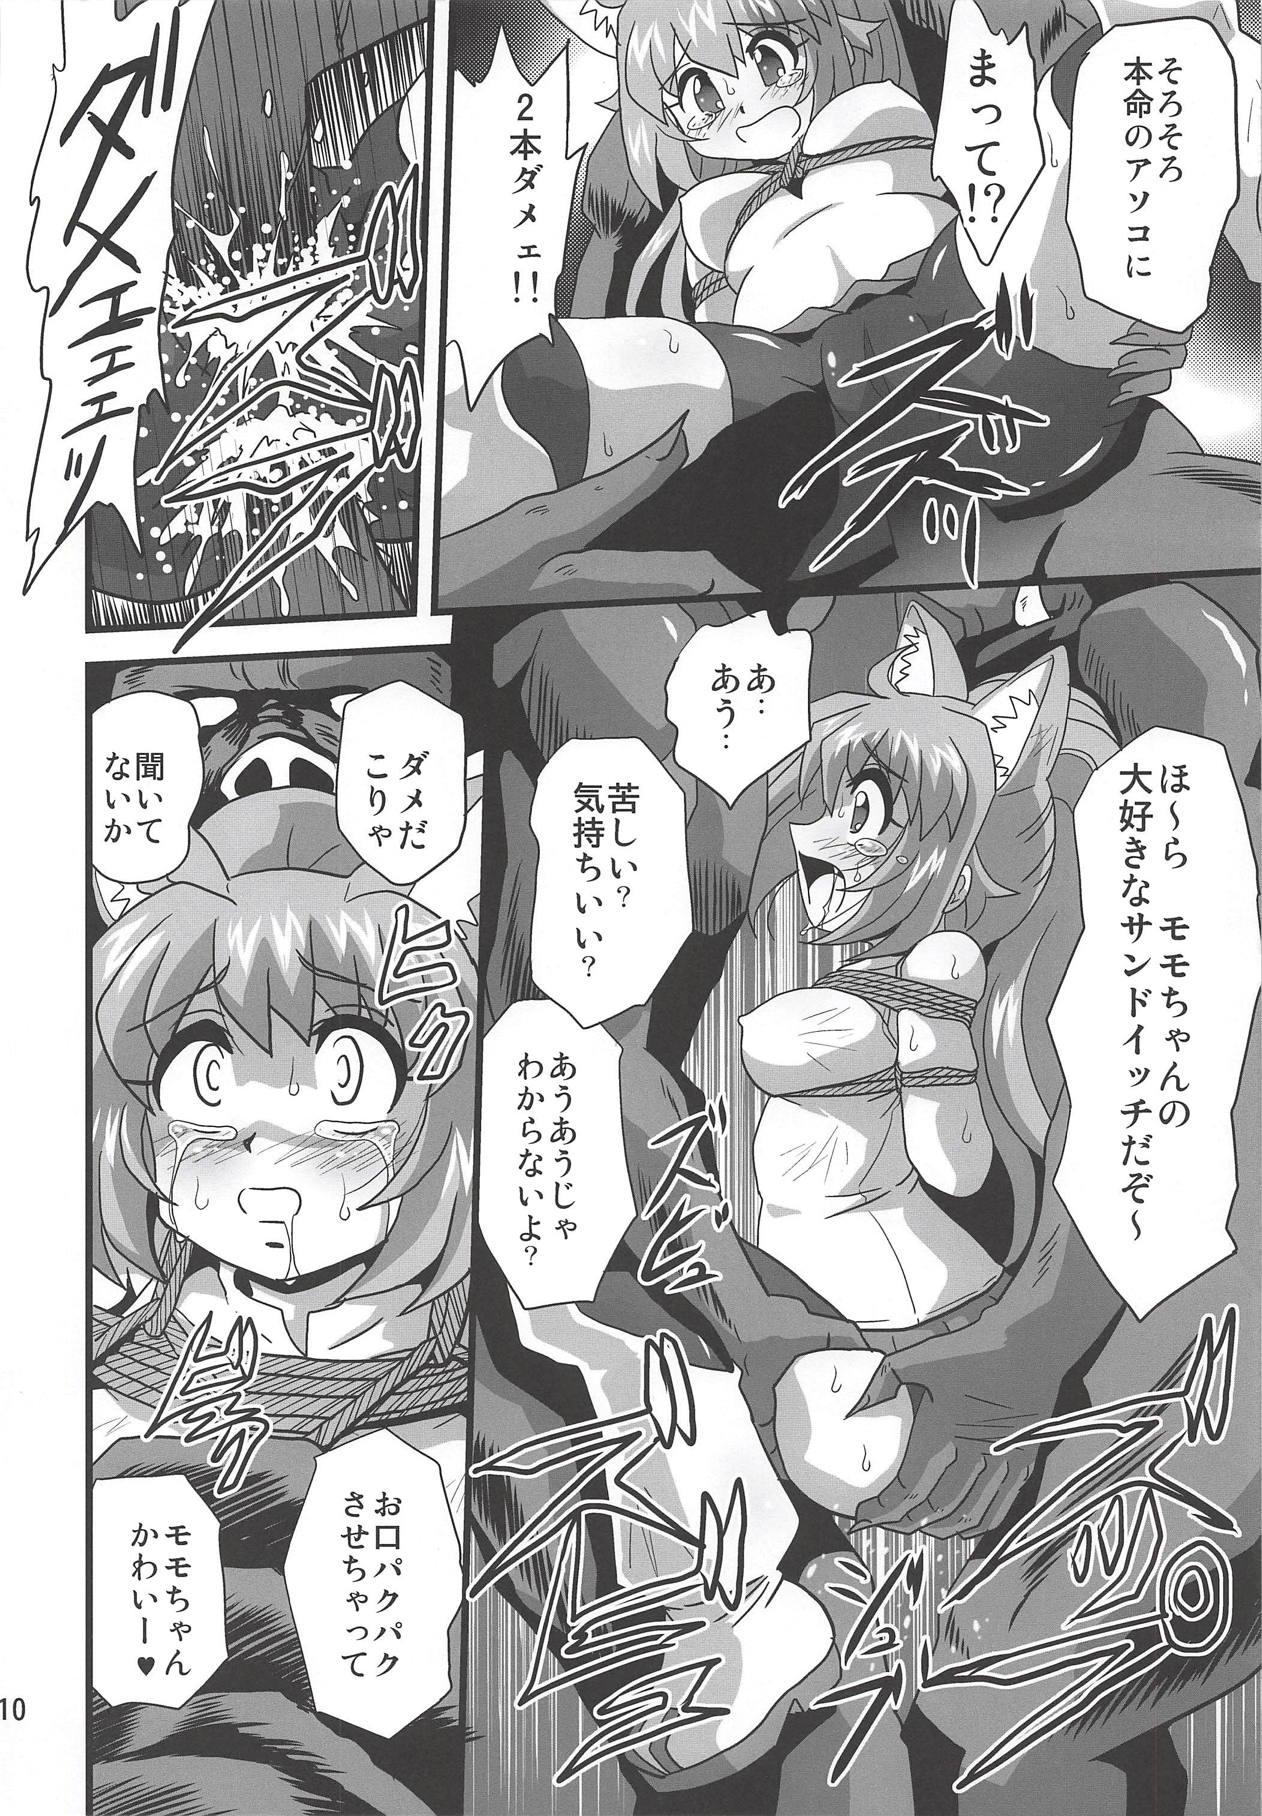 Girl Girl Diver's High 2 - Gundam build divers Mulher - Page 9